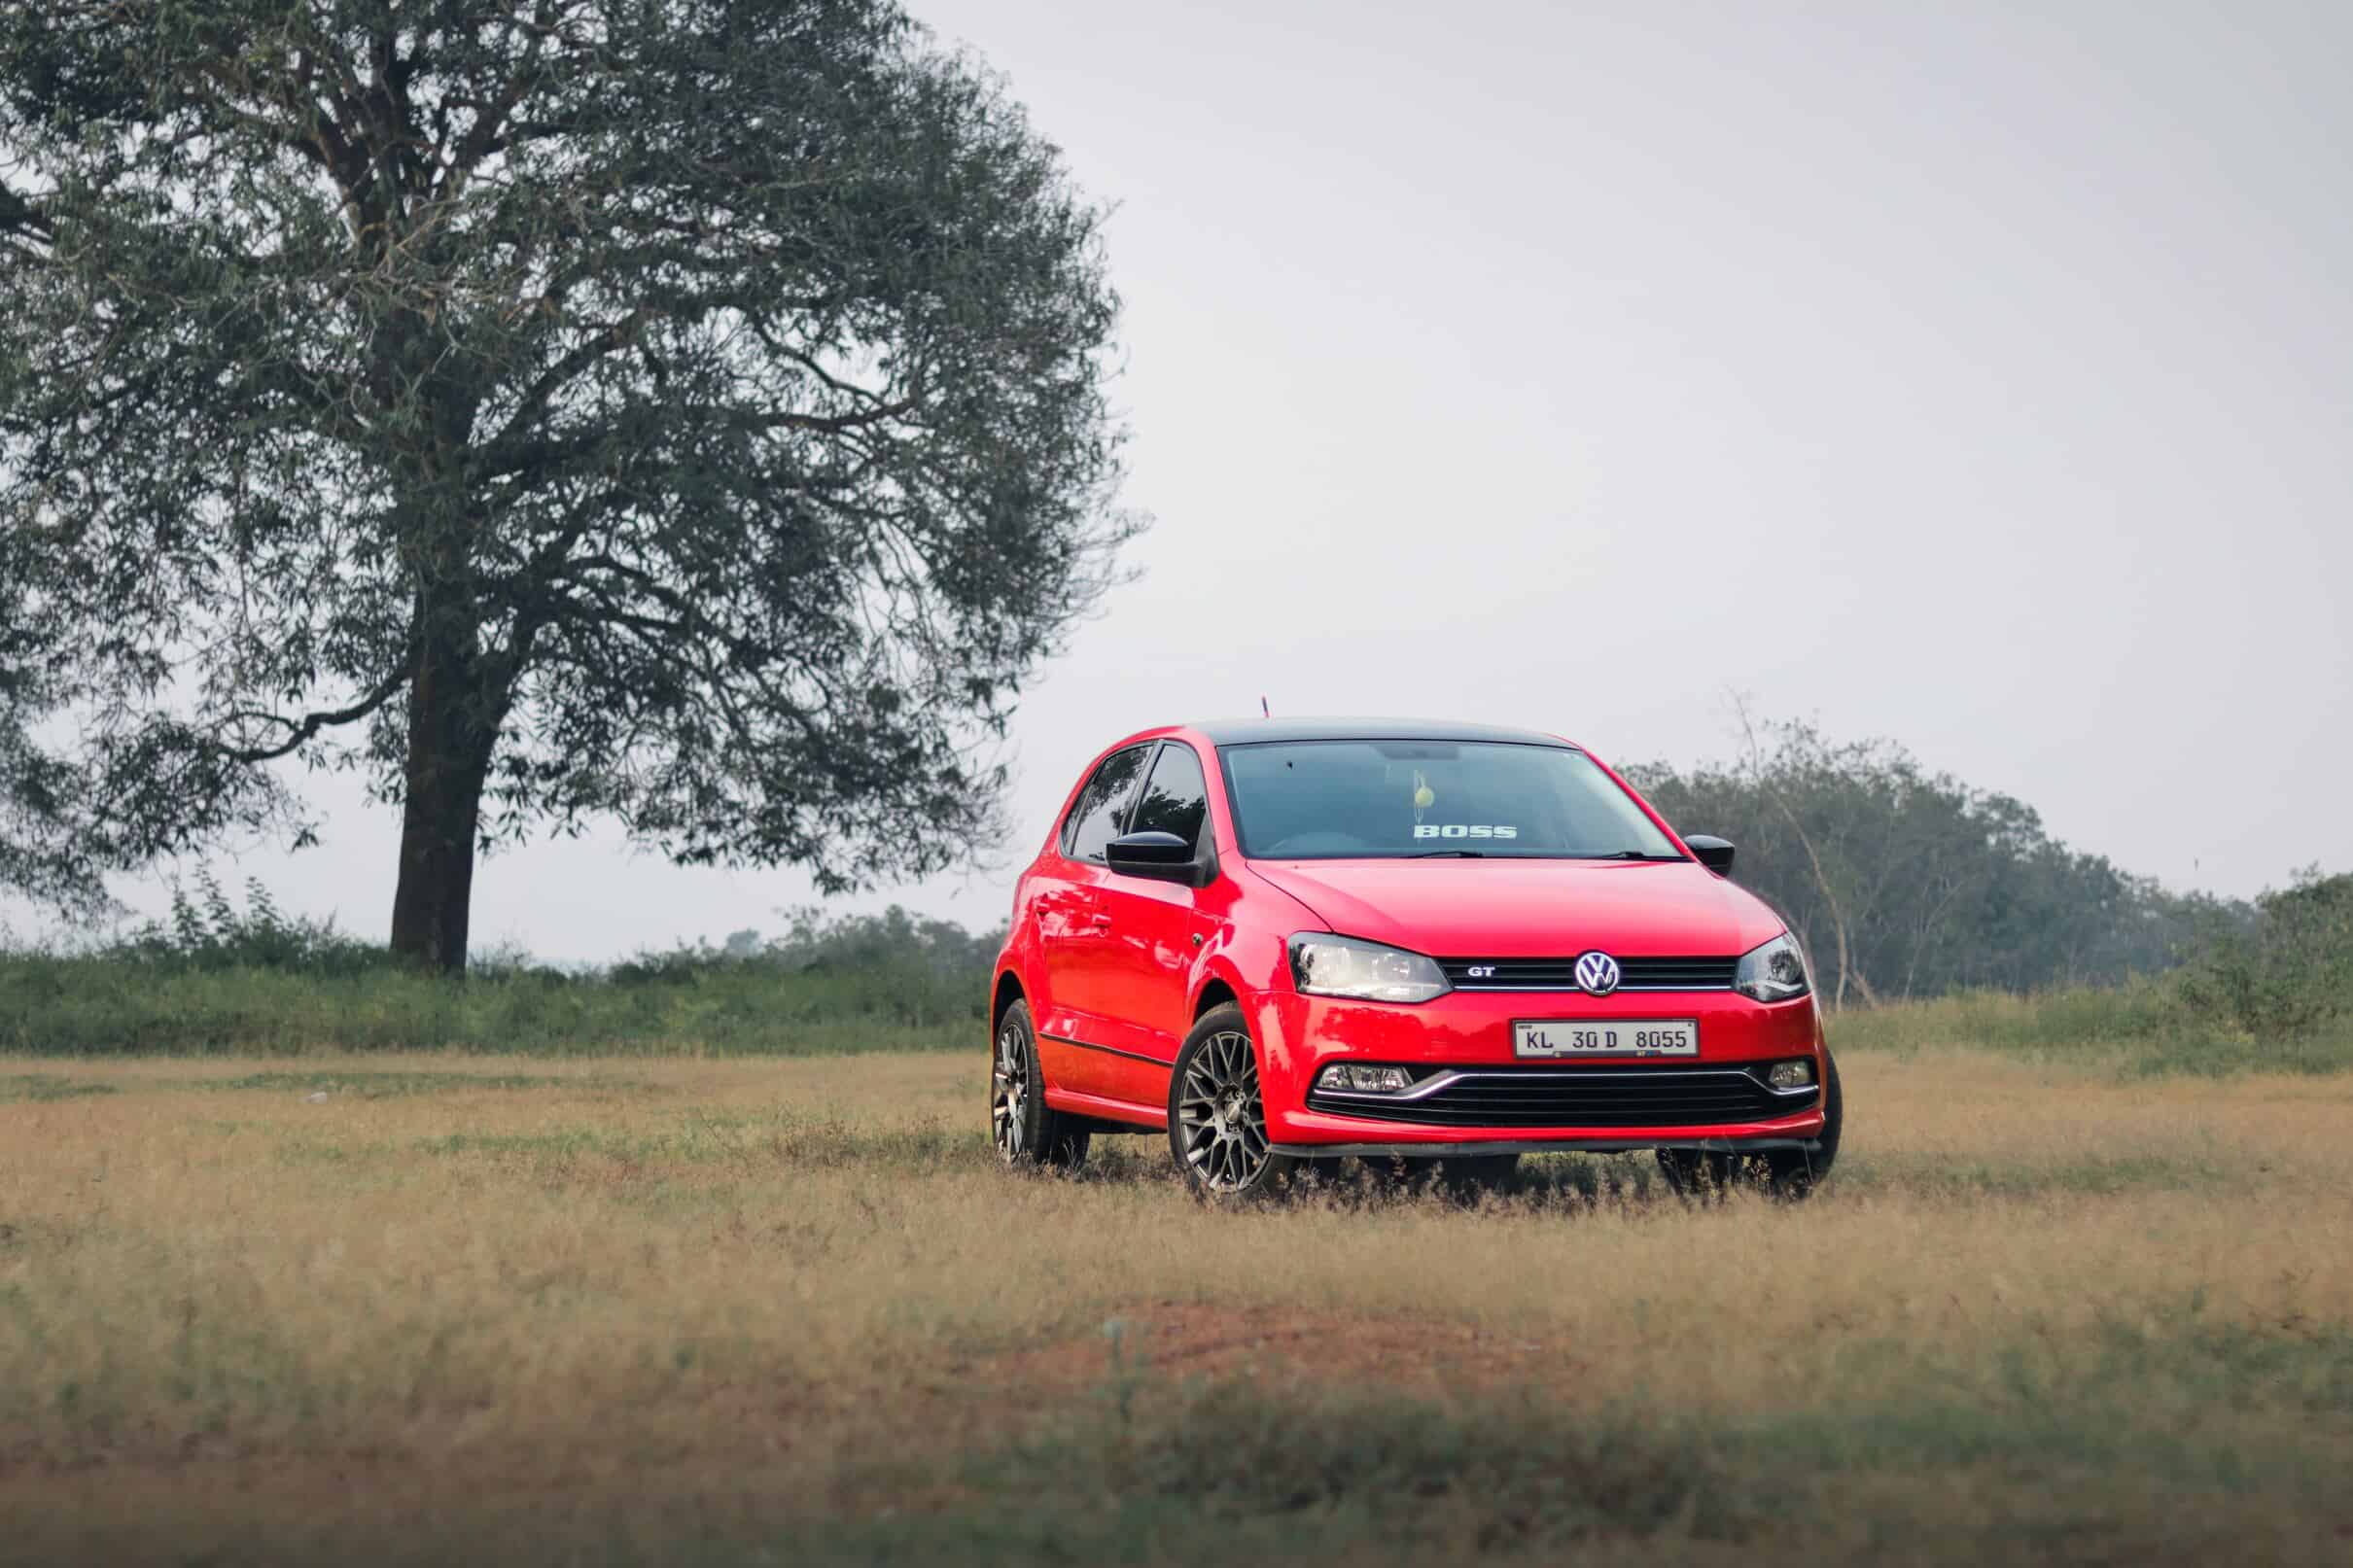 Red Volkswagen Polo parked in an urban setting, showcasing its modern design and vibrant character.